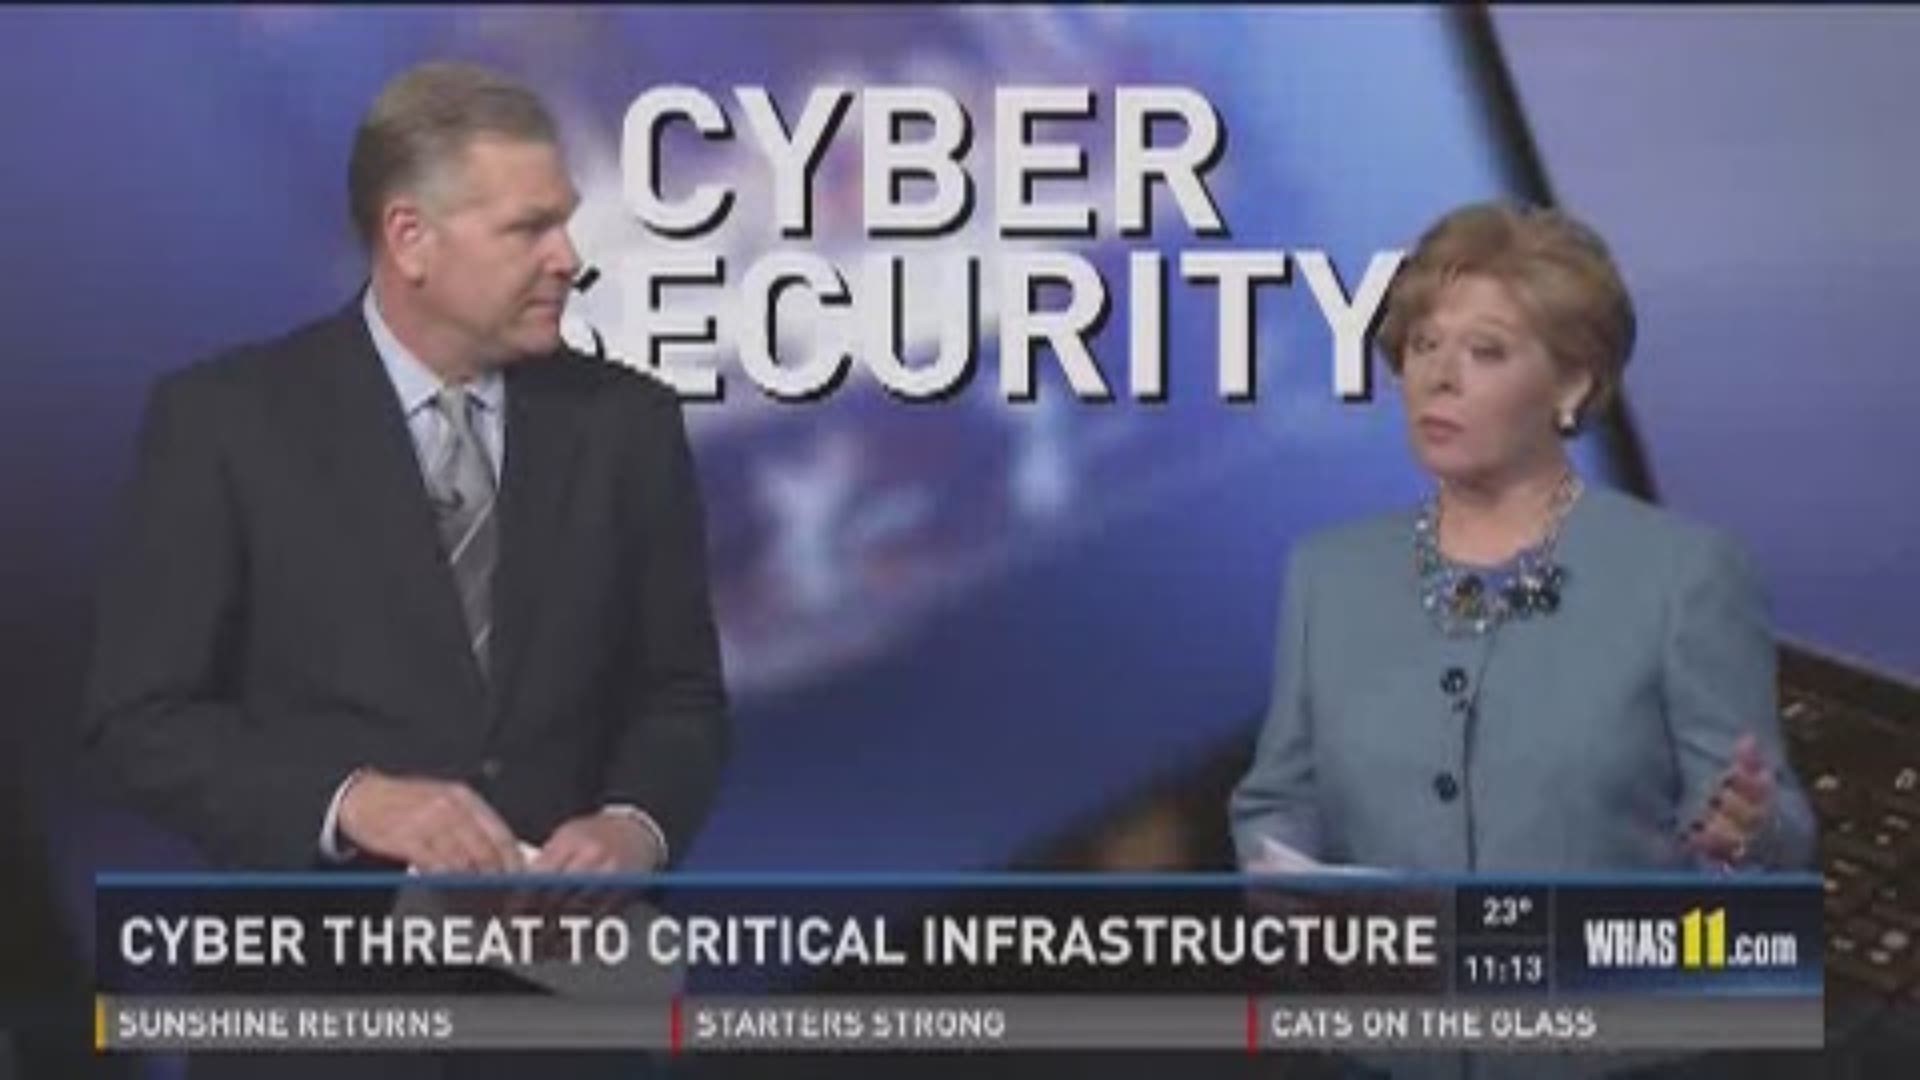 Cyber threat critical to infrastructure